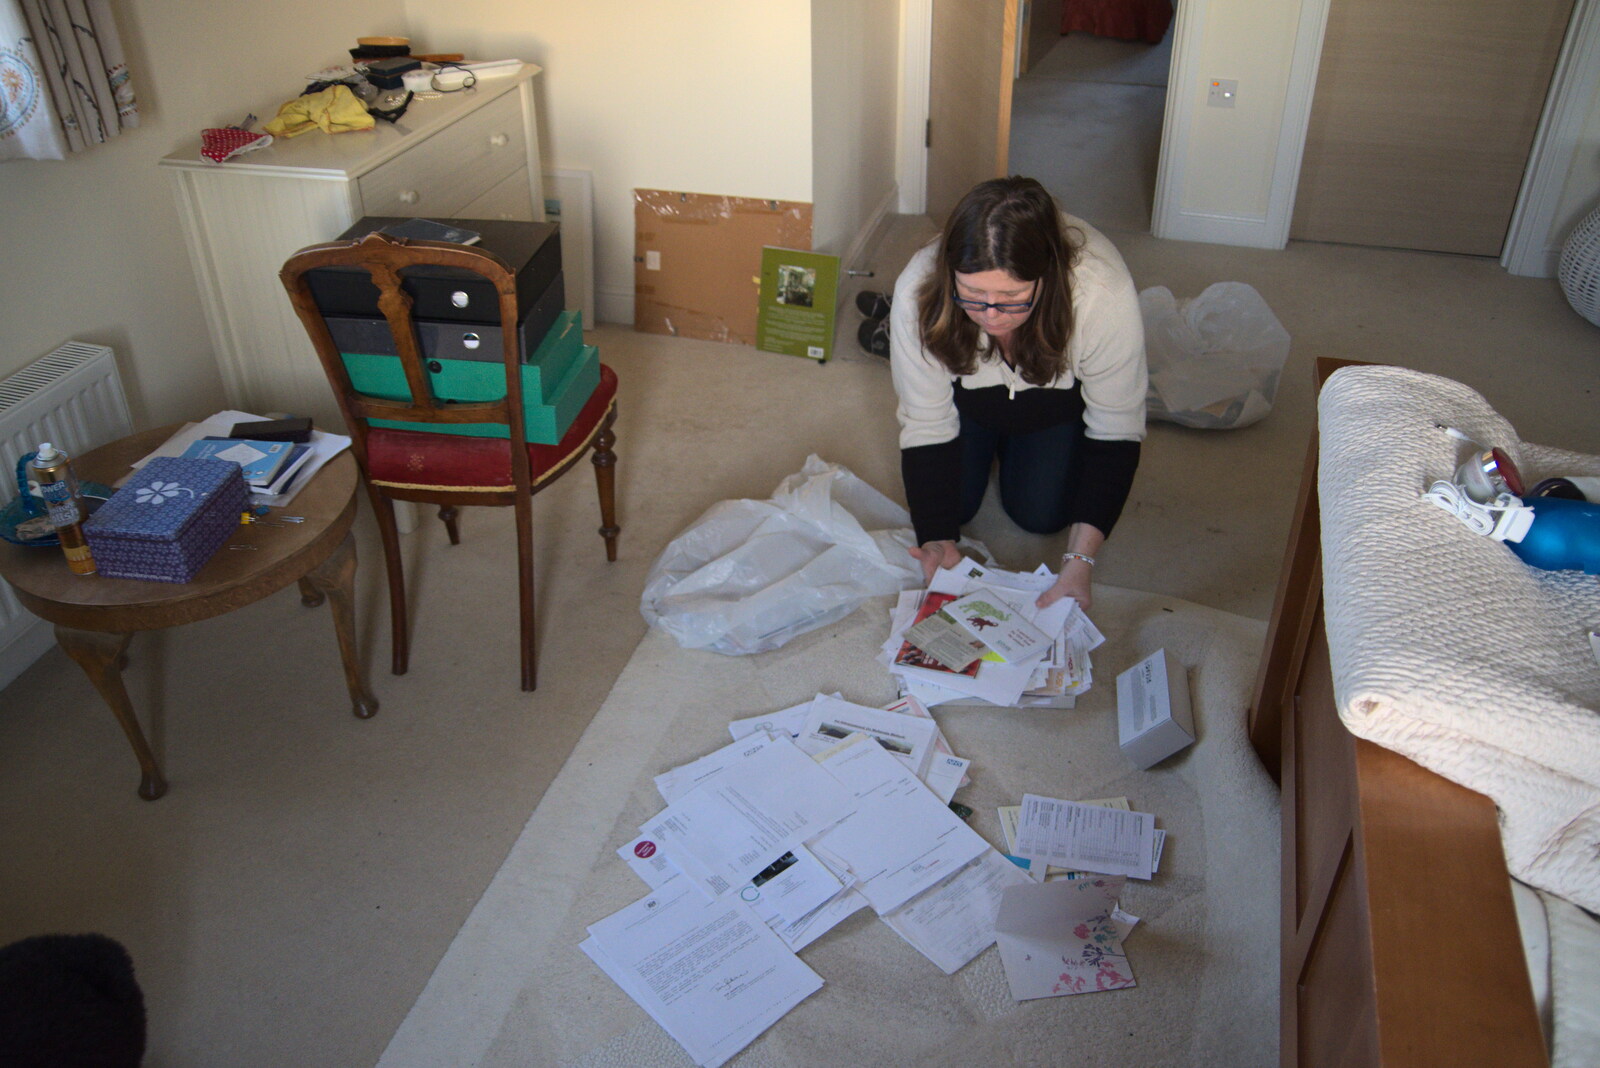 More paperwork sorting from A Short Trip to Spreyton, Devon - 18th January 2020